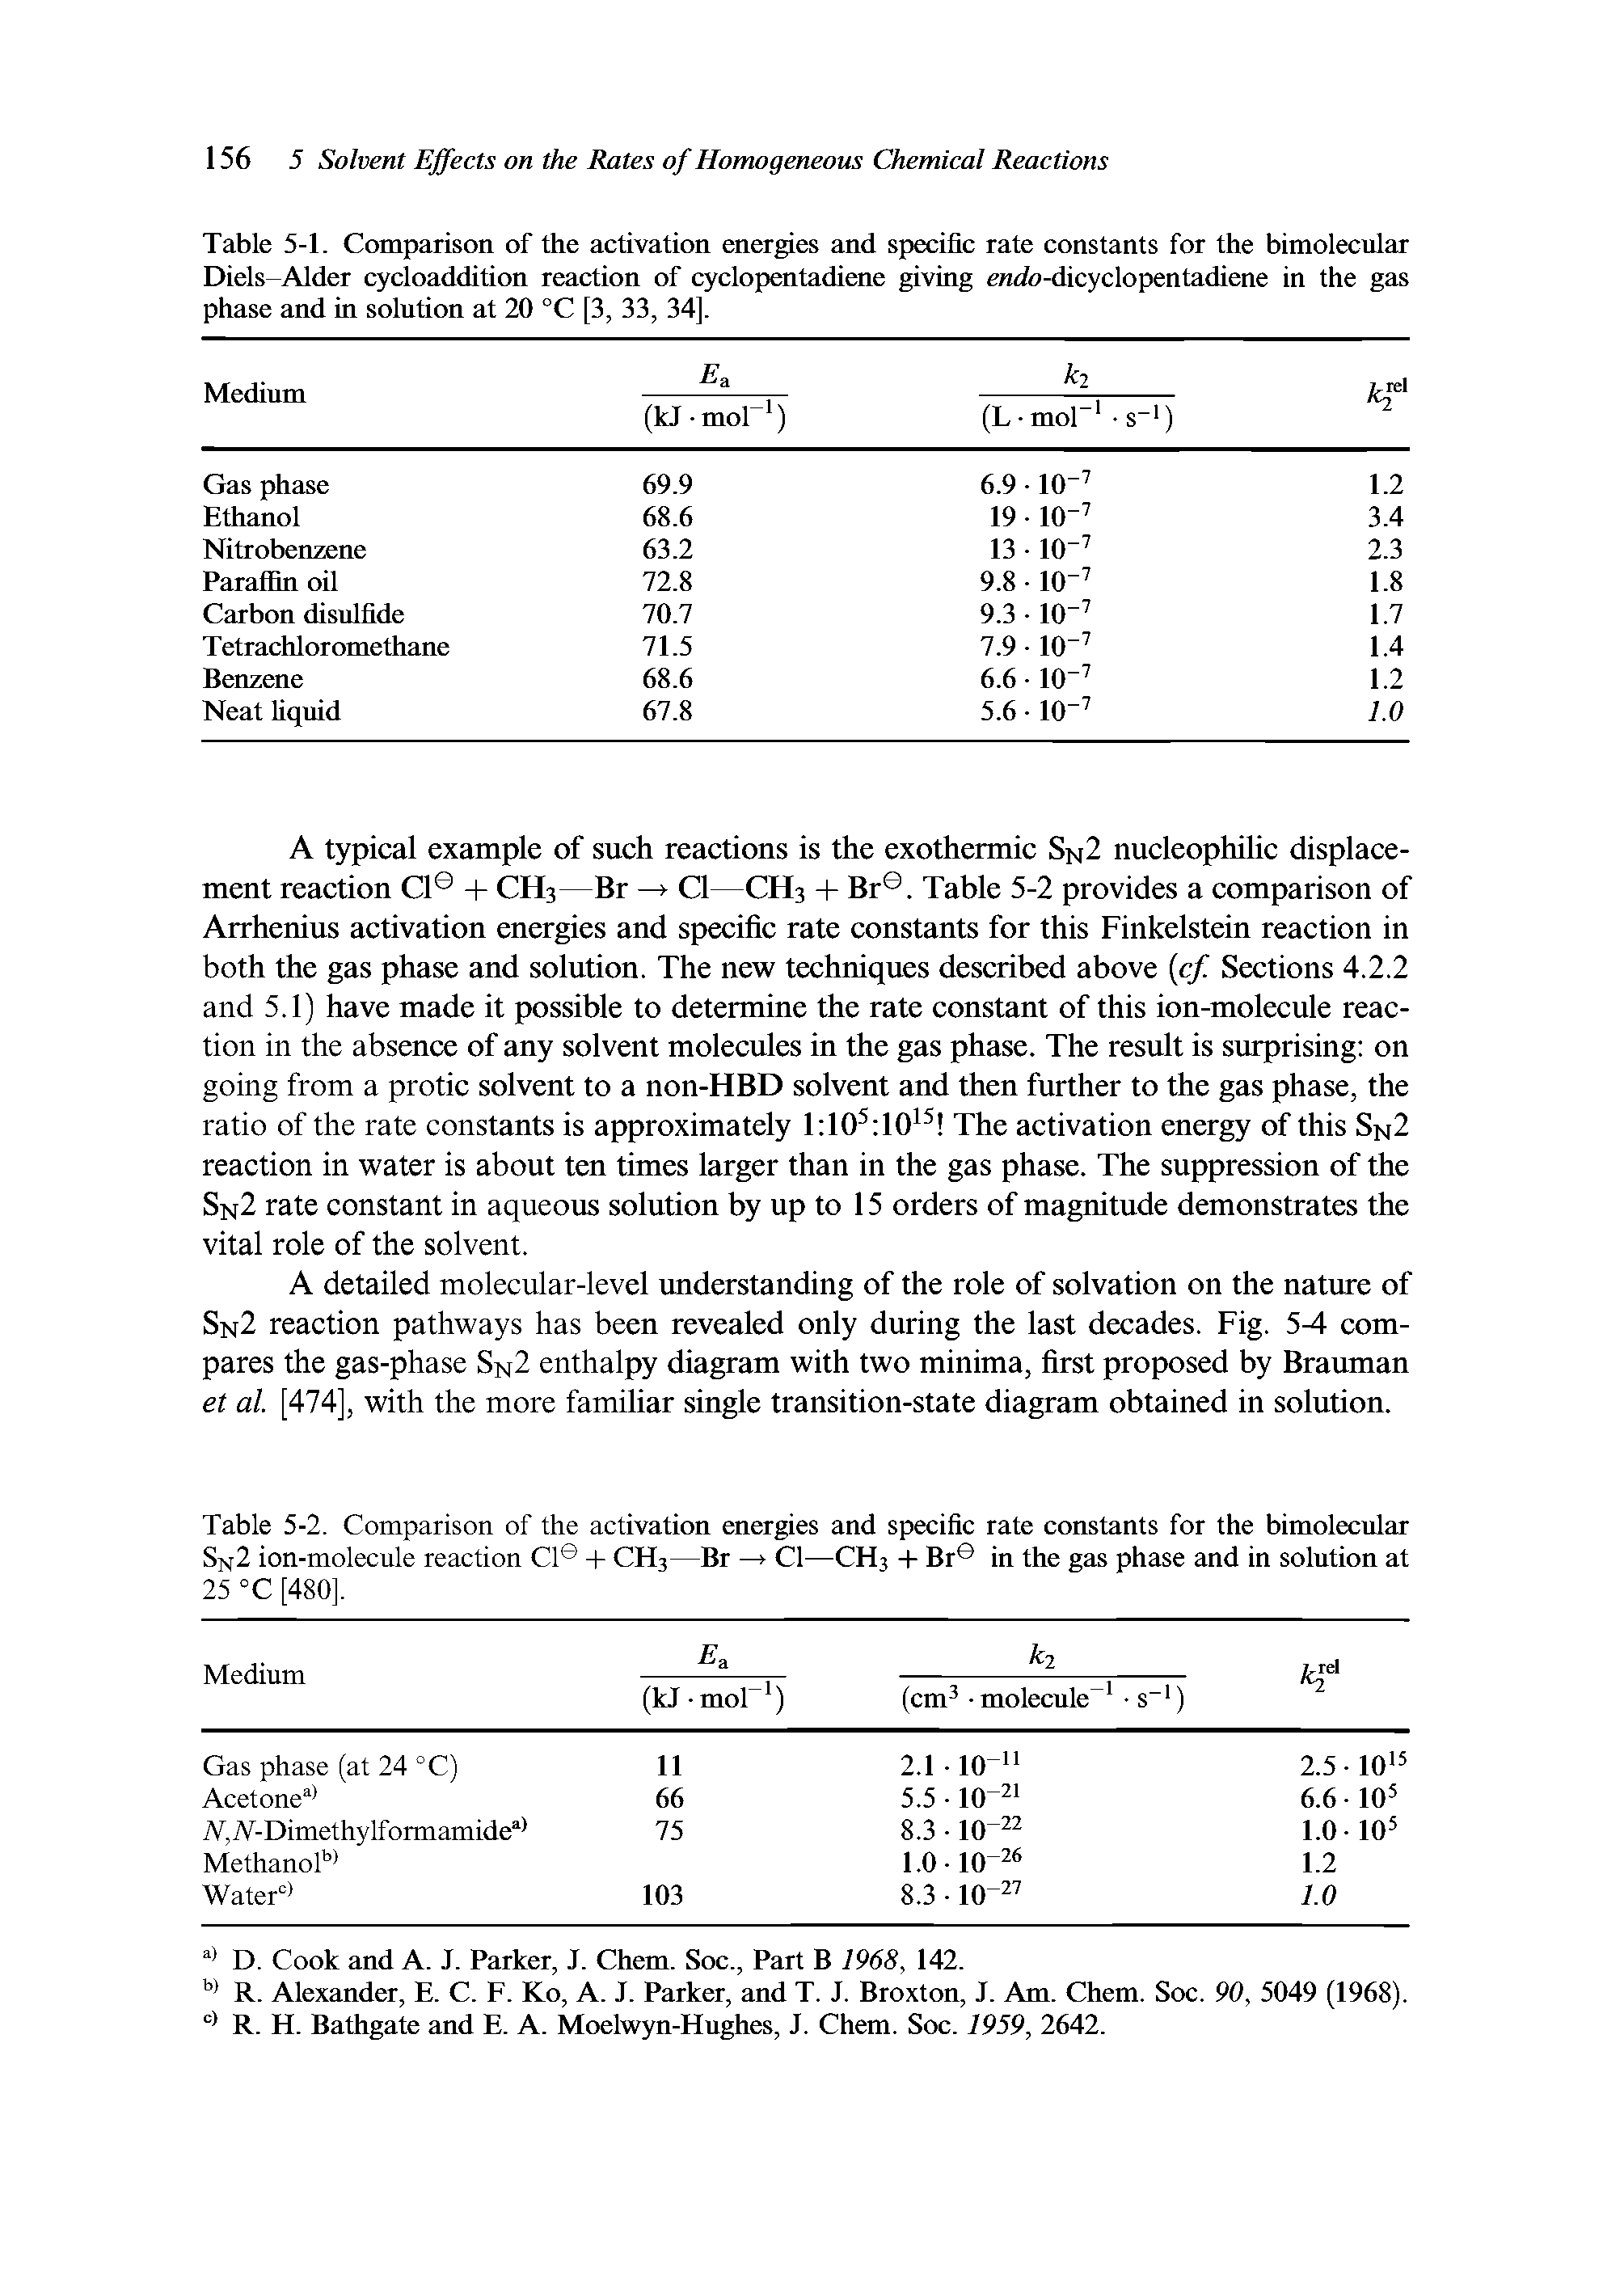 Table 5-1. Comparison of the activation energies and specific rate constants for the bimolecular Diels-Alder cycloaddition reaction of cyclopentadiene giving endo-dicyclopentadiene in the gas phase and in solution at 20 °C [3, 33, 34],...